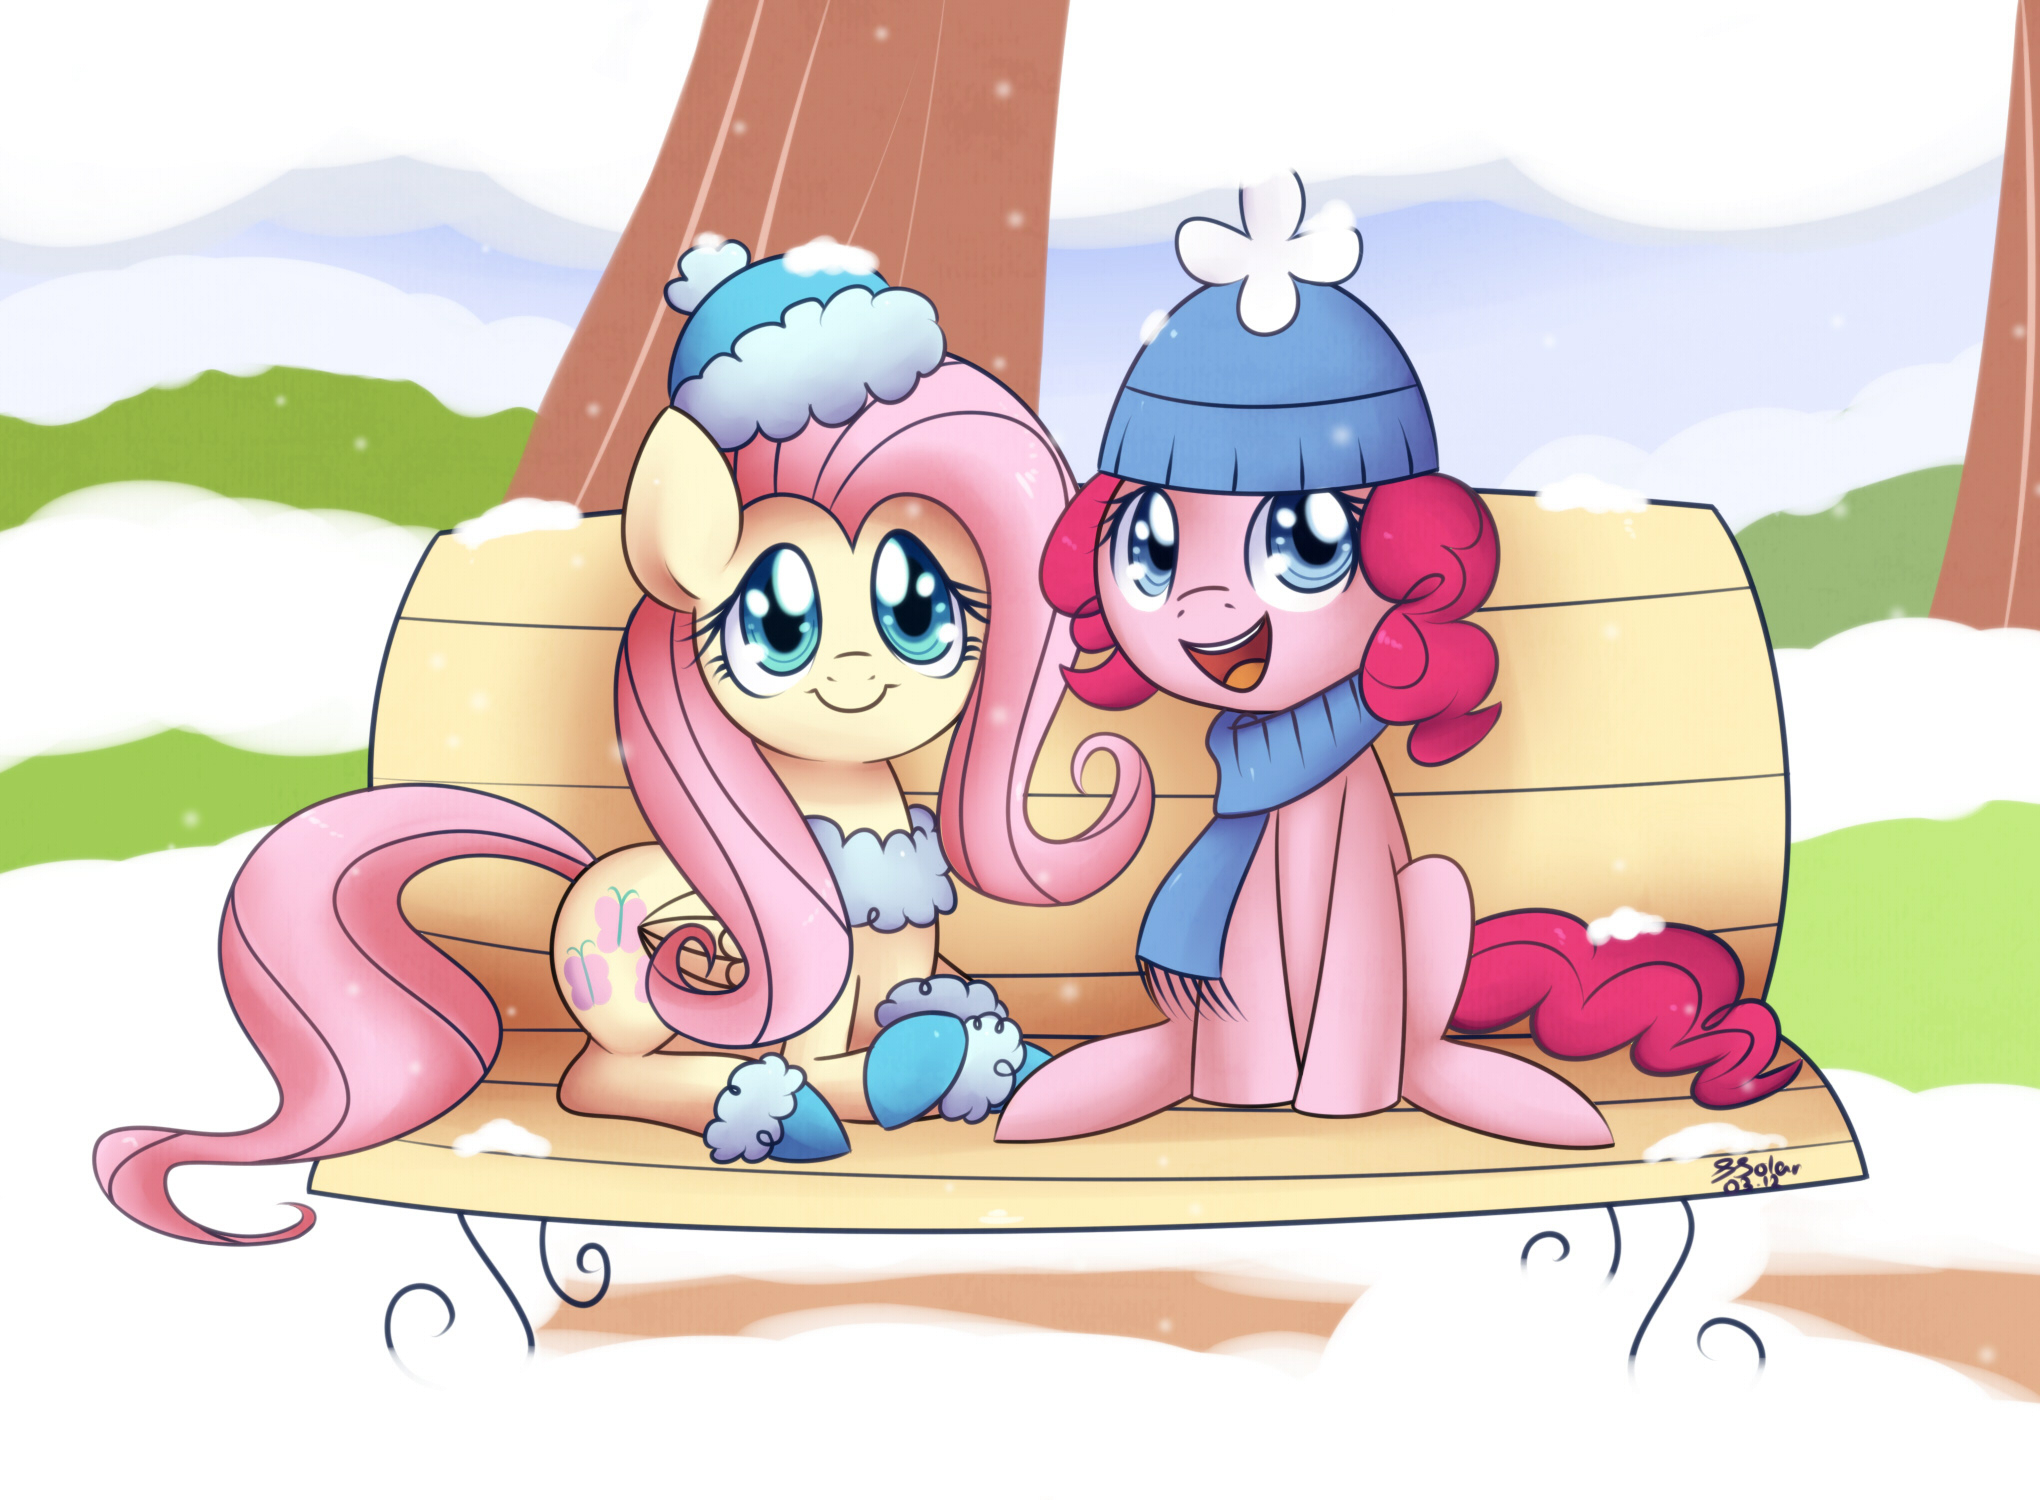 Winter Time by Soapie-Solar